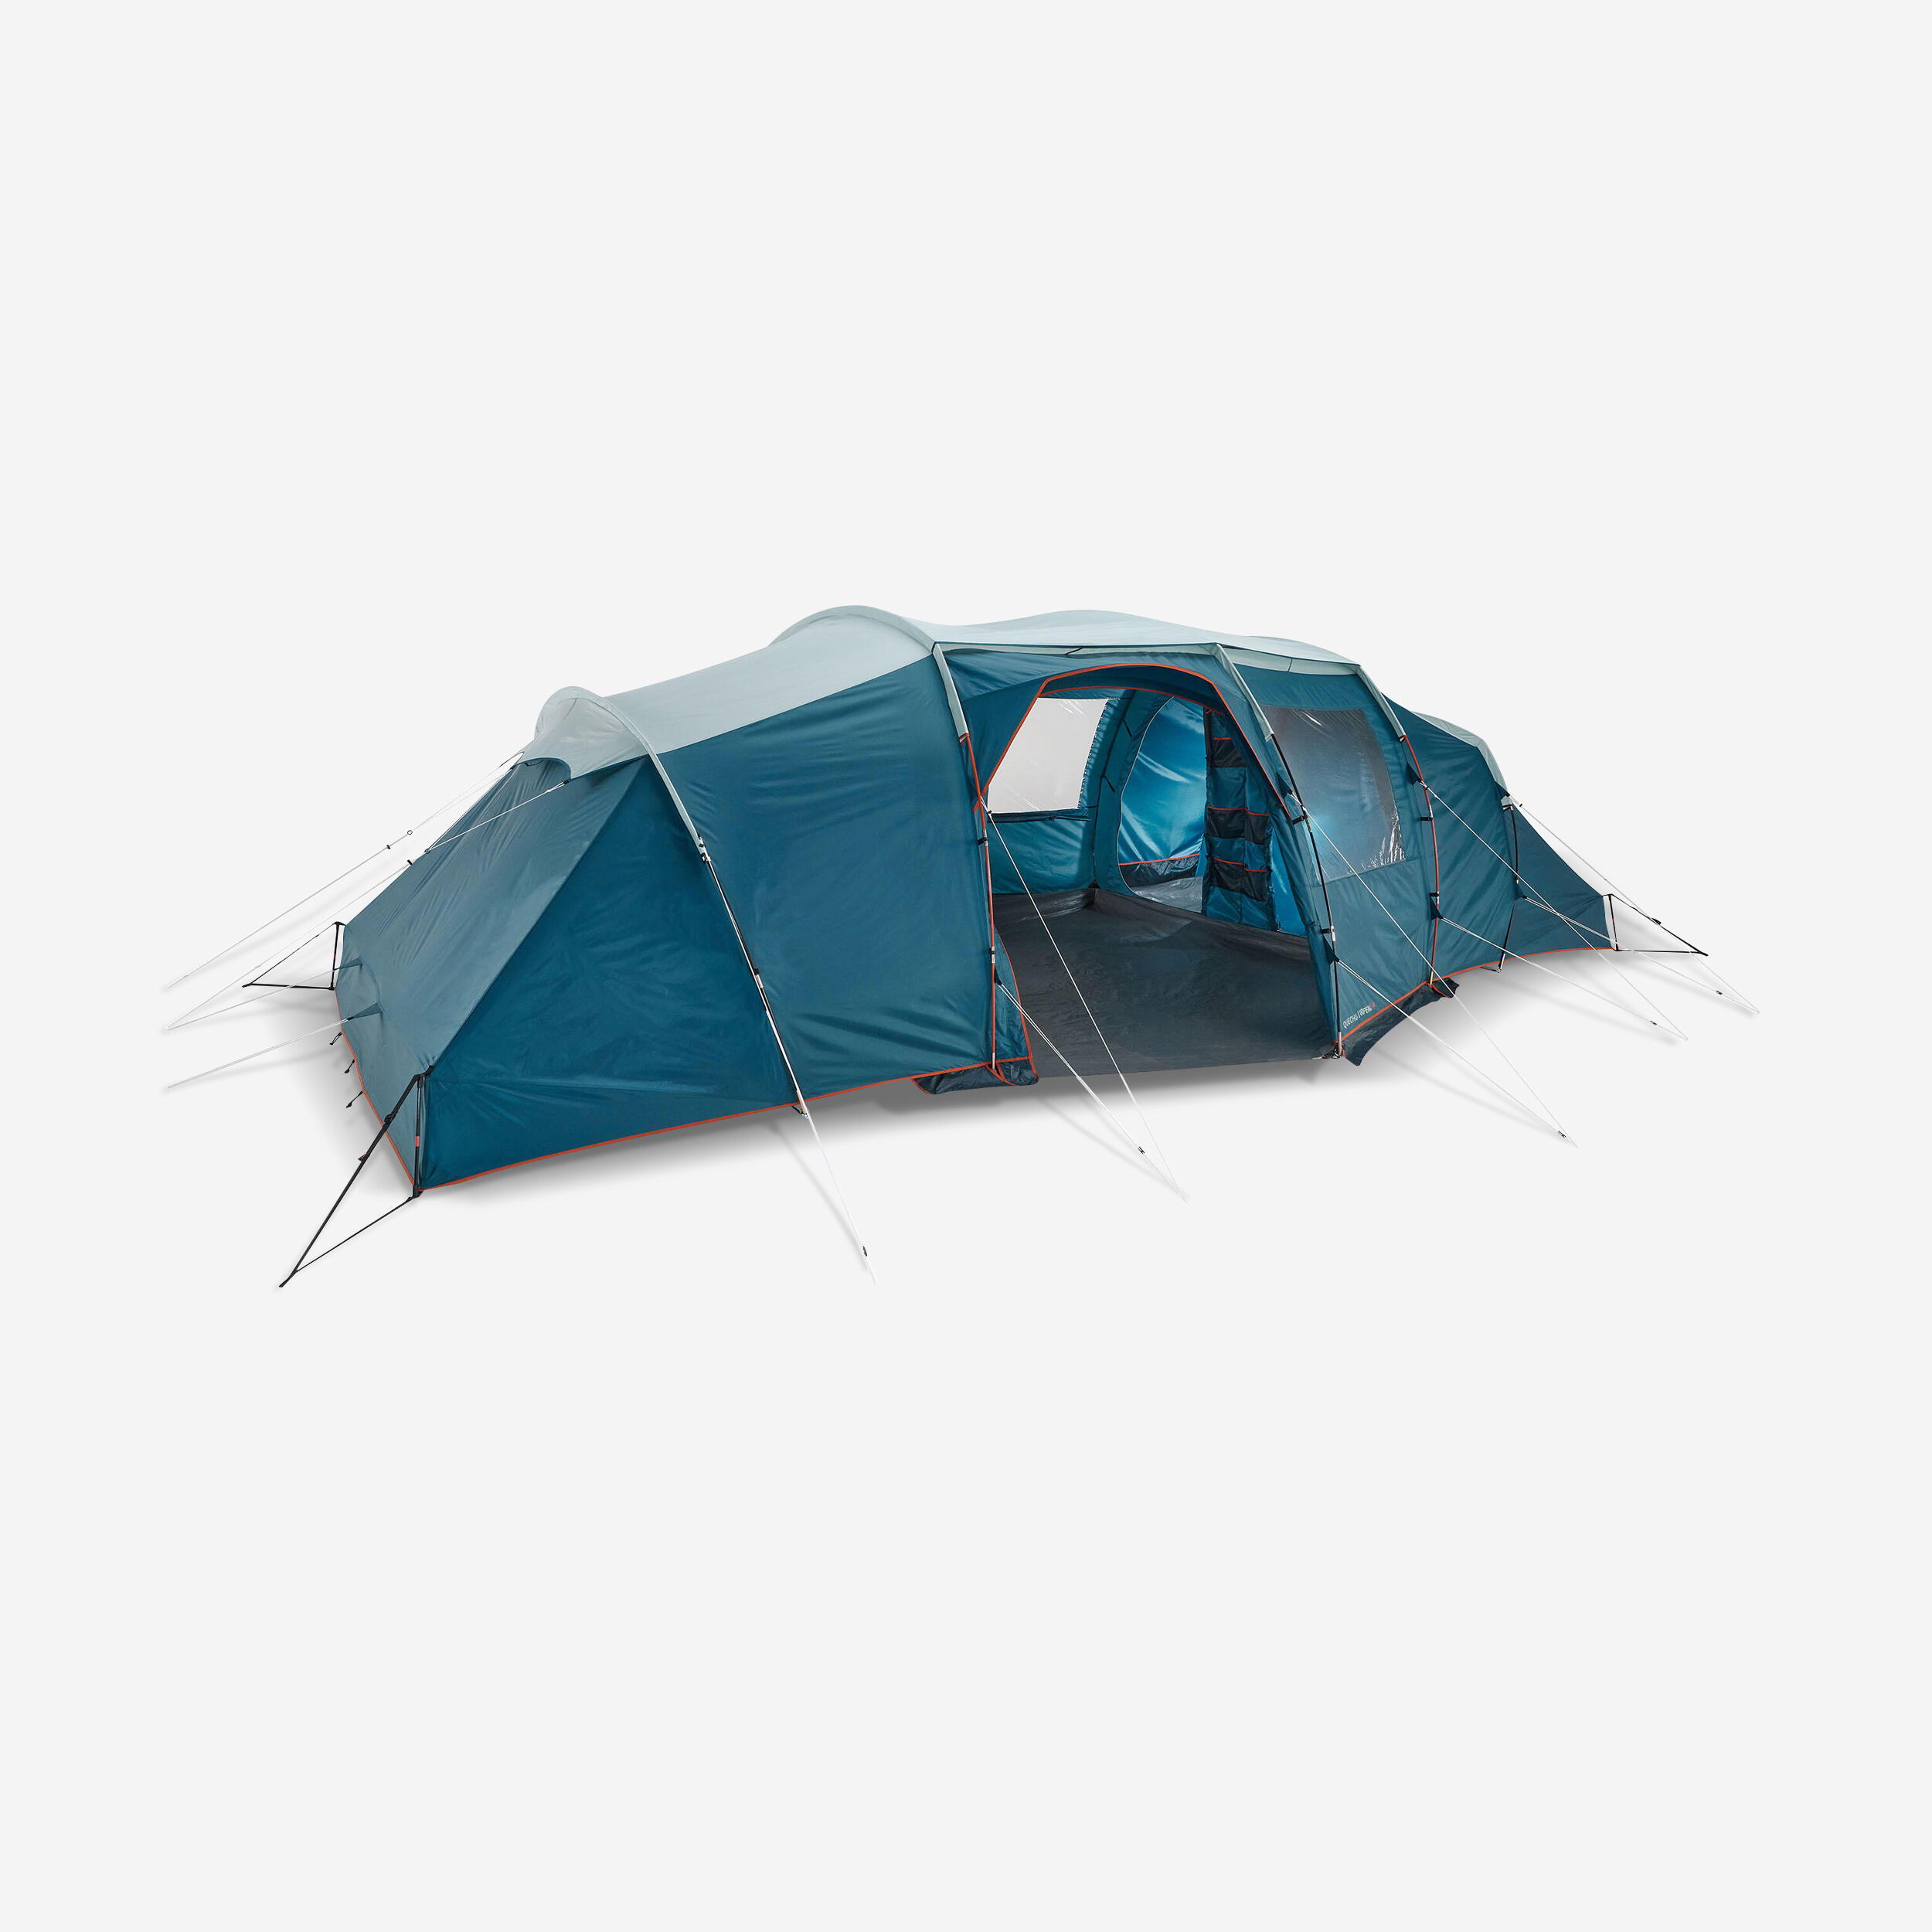 Quechua Camping Tent With Poles - Arpenaz 8.4 8 Person 4 Bedrooms